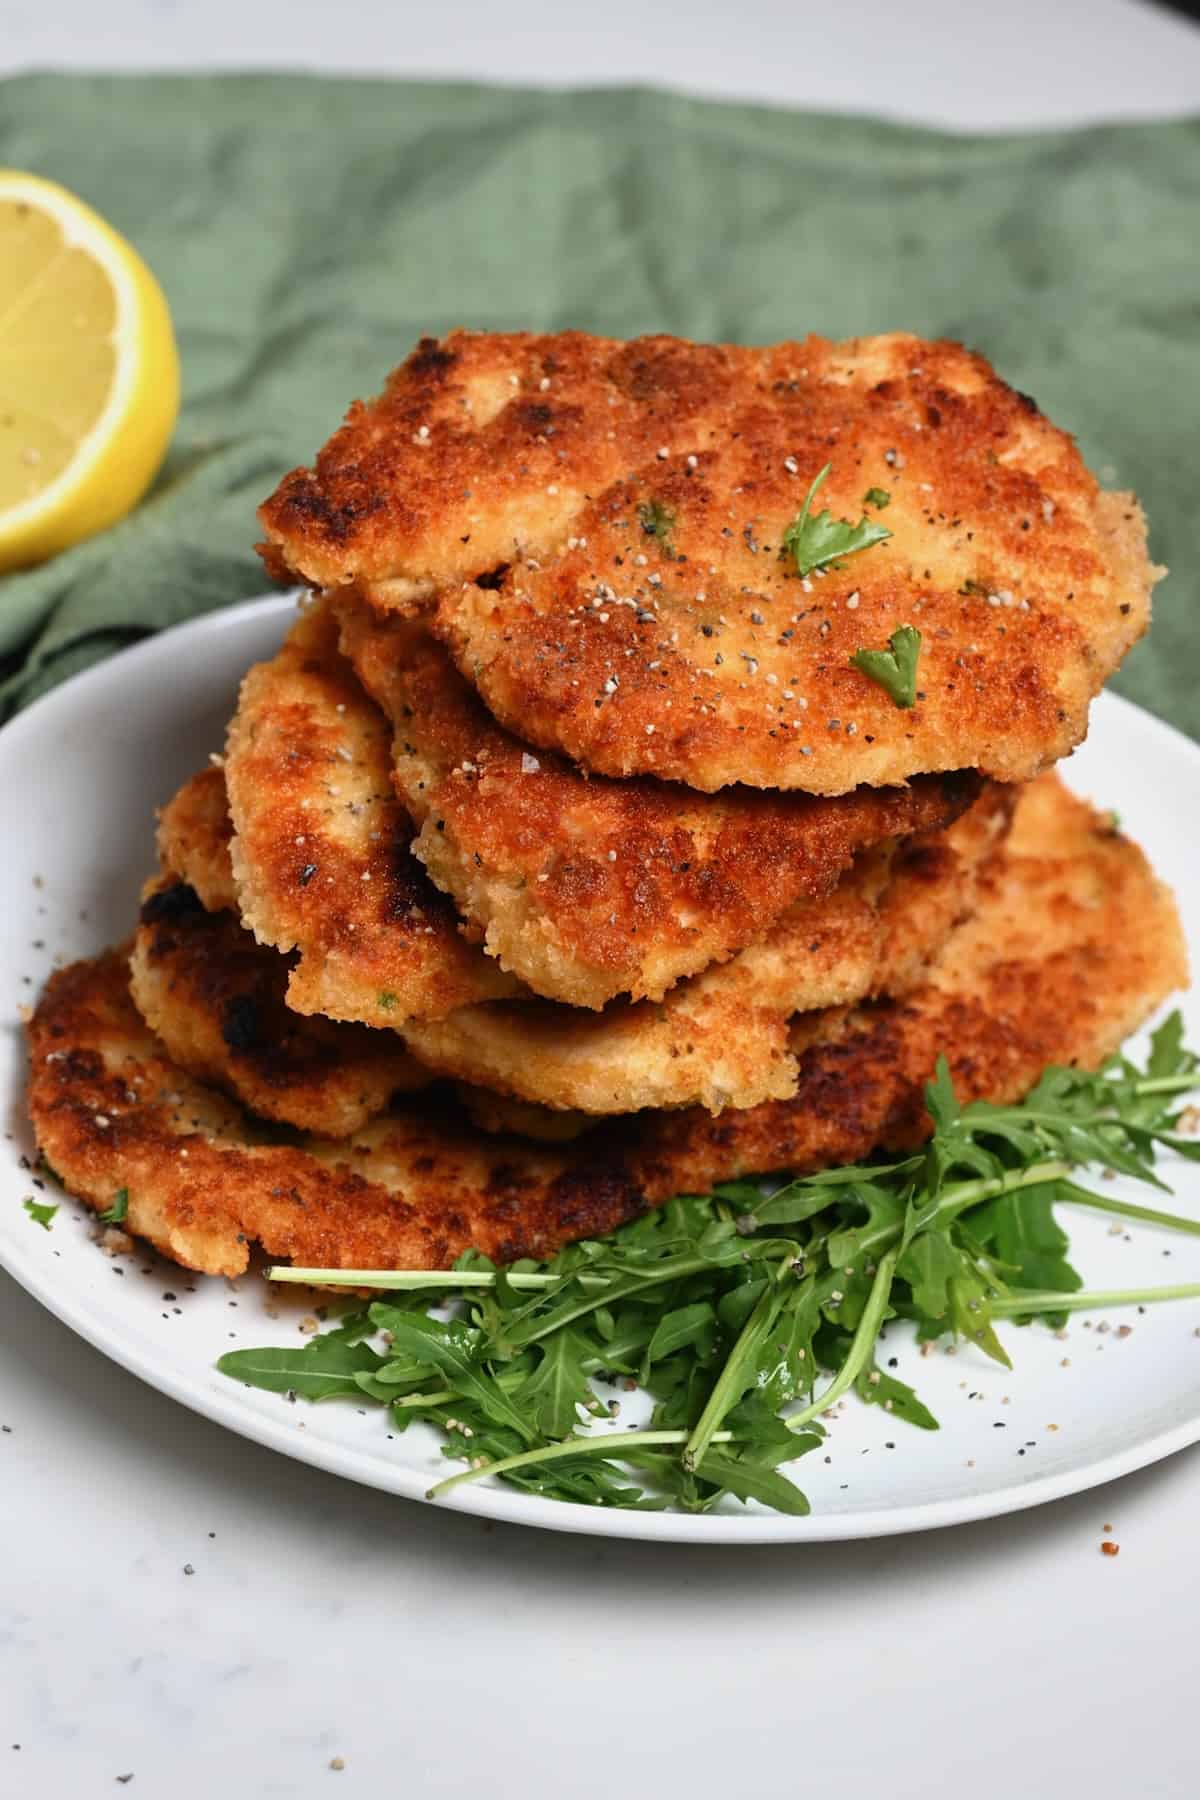 Stacked breaded chicken cutlets